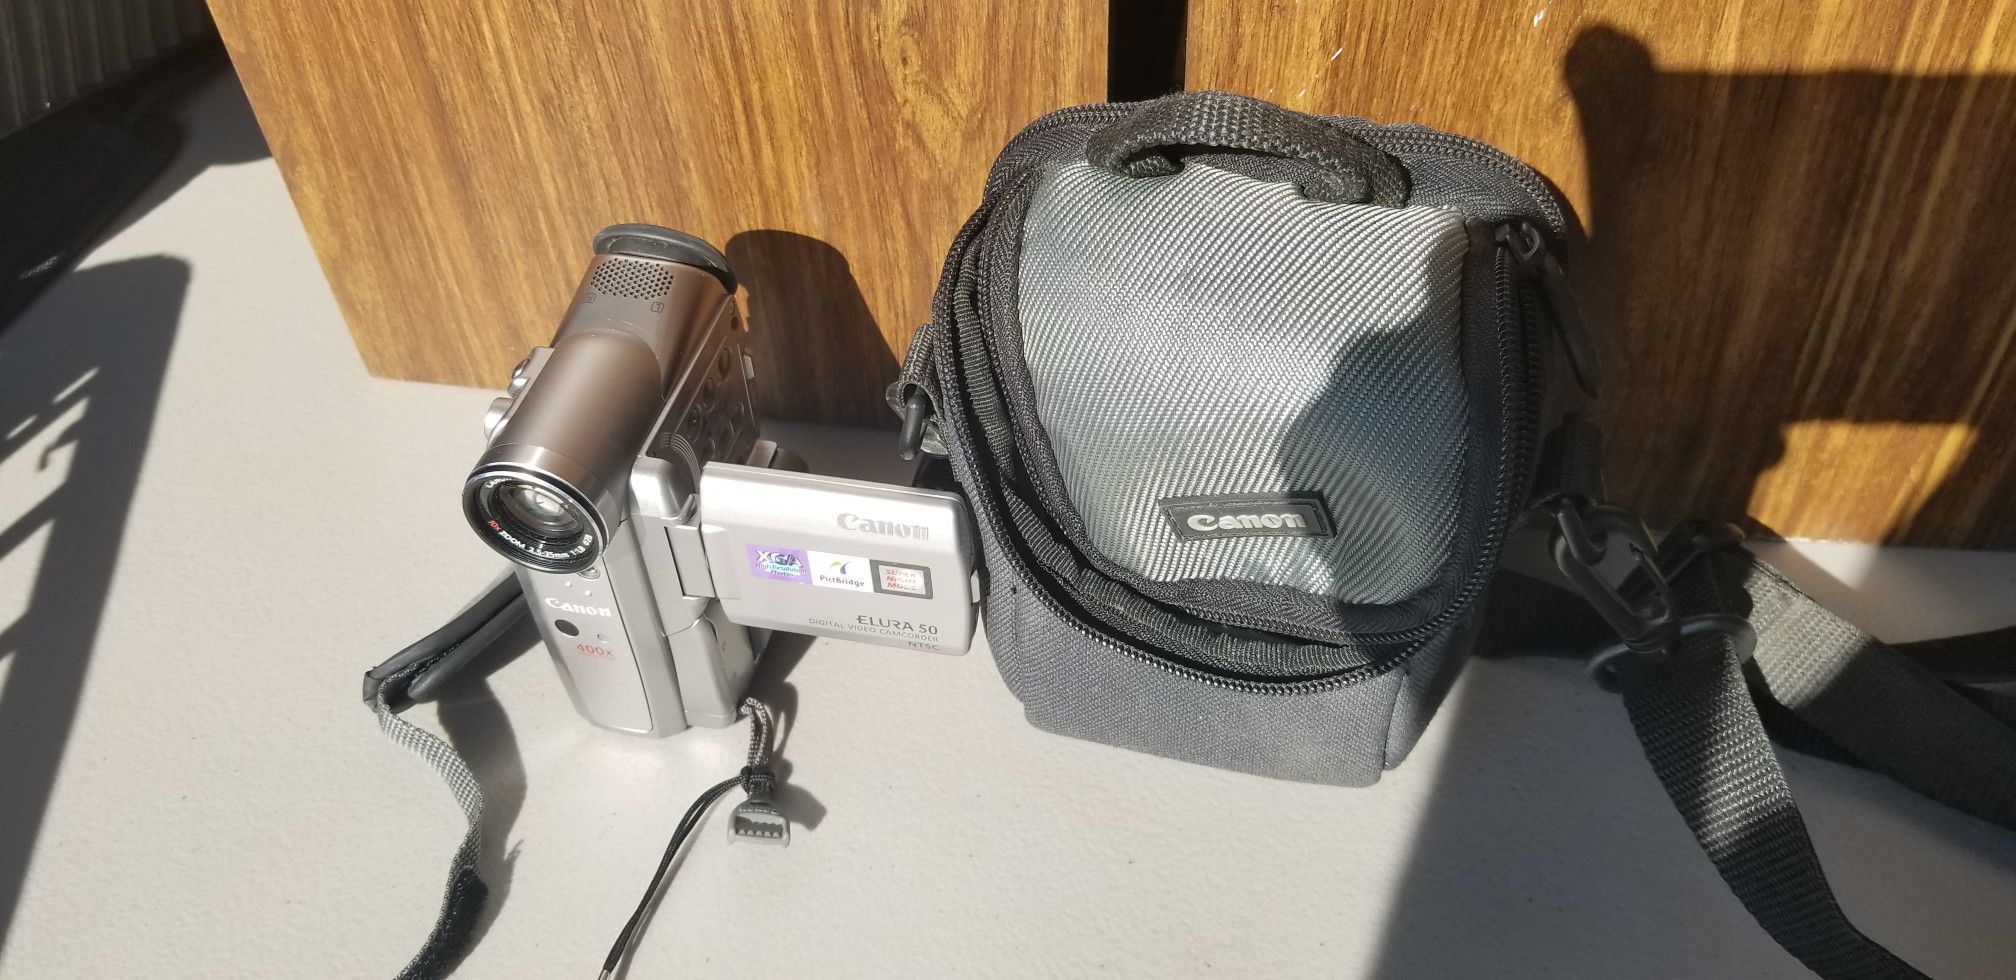 Canon Elura 50 No Charger, comes with 2 batteries